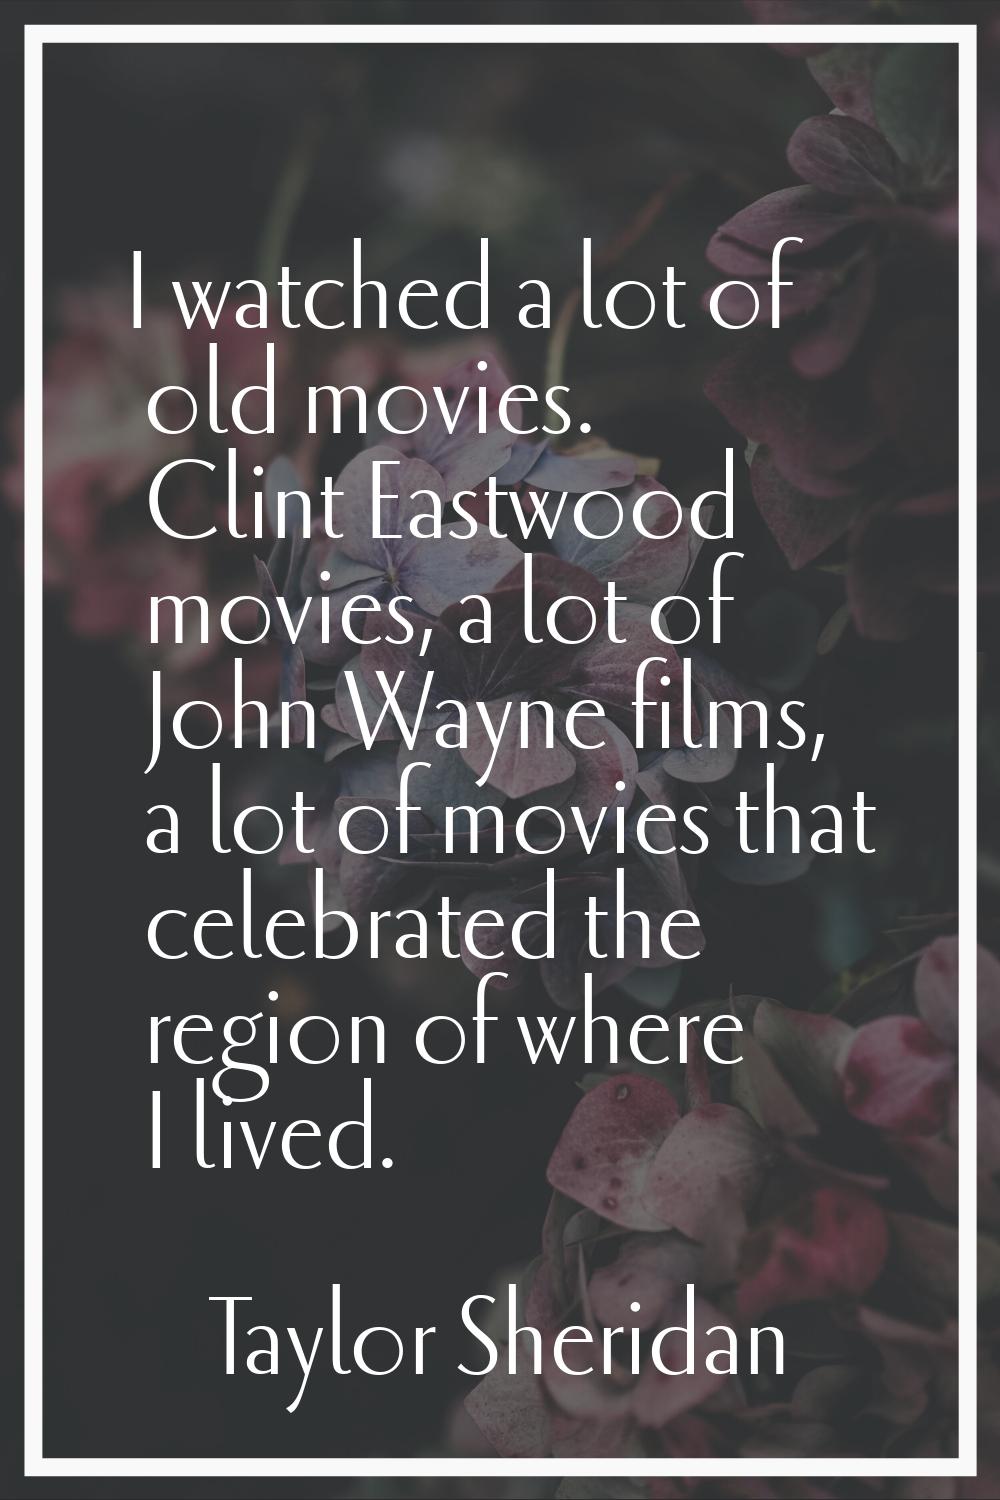 I watched a lot of old movies. Clint Eastwood movies, a lot of John Wayne films, a lot of movies th